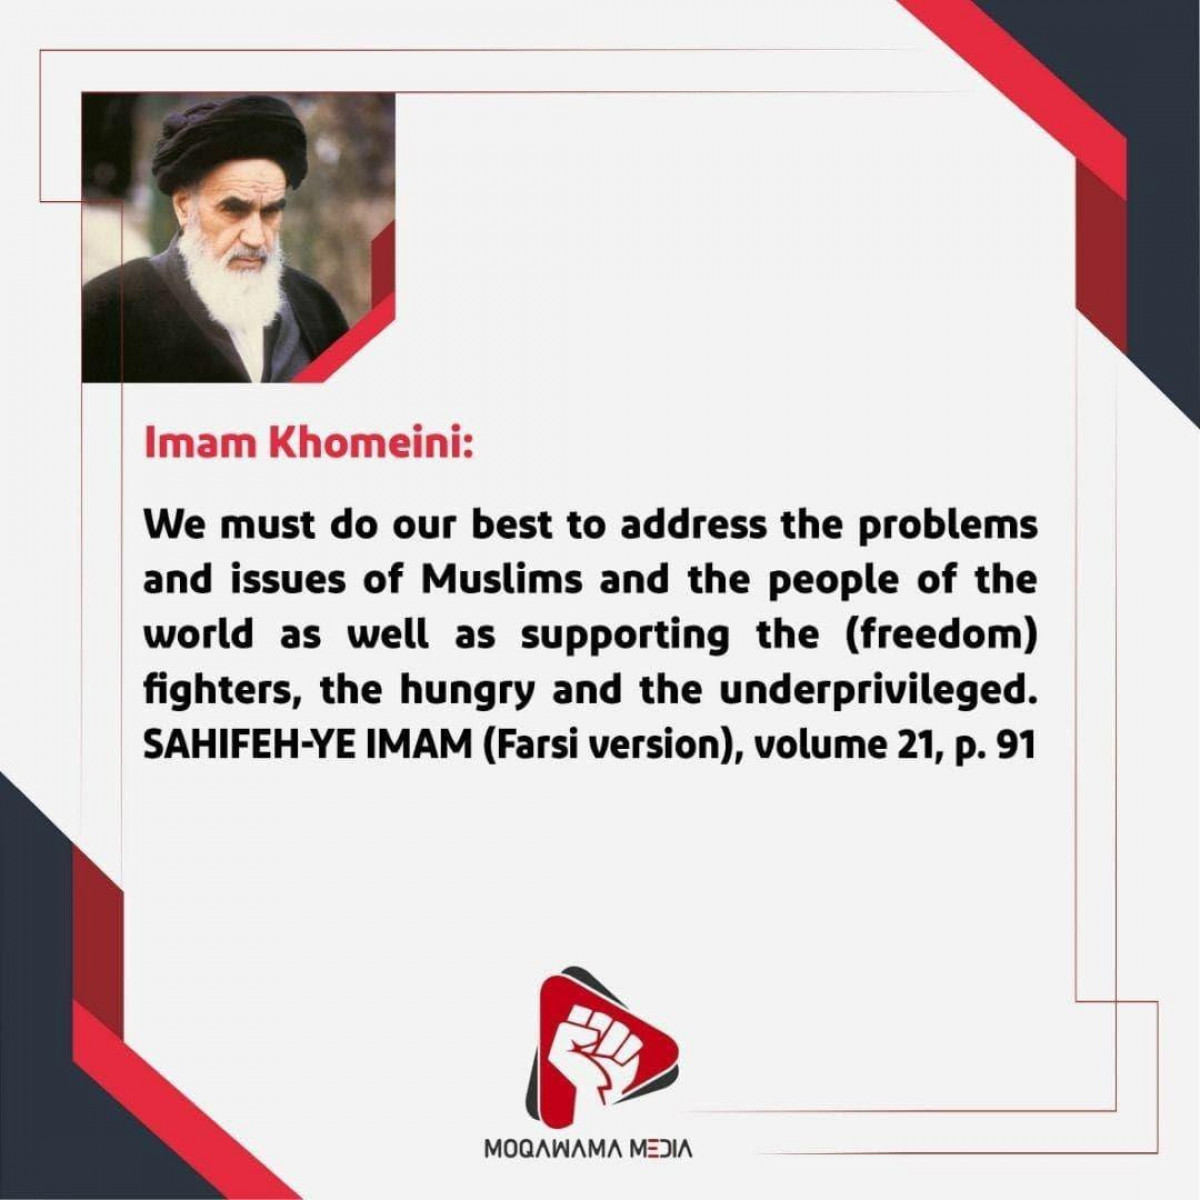 Imam Khomeini: We must do our best to address the problems and issues of Muslims and the people of the world